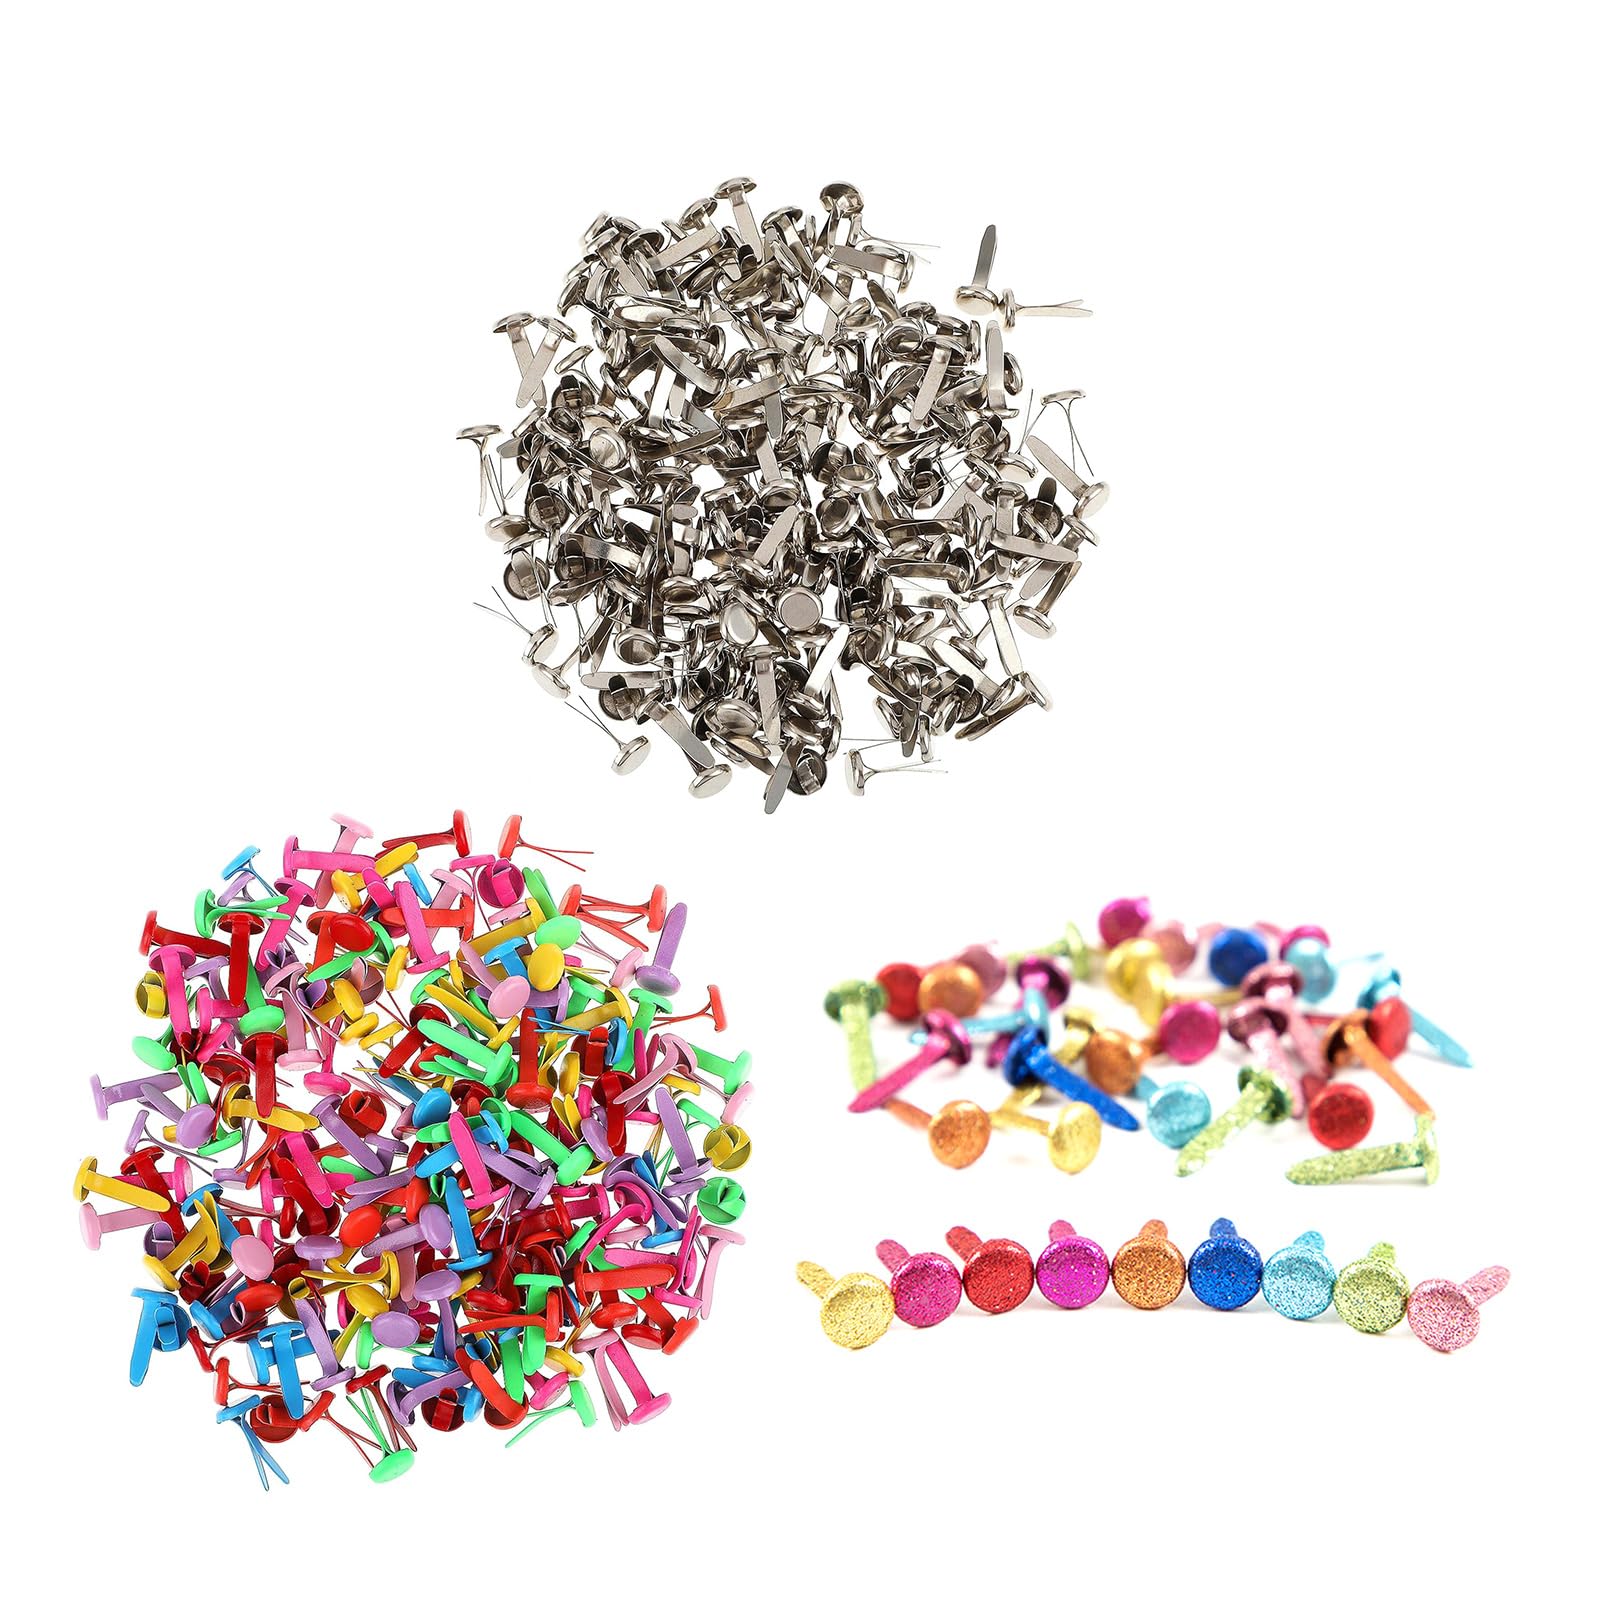 Pack Of 100 Mini Round Brads Metal Clips Paper Clasps Split Pins Crafting Essential For Scrapbooking DIY Crafts Durable Mini Brads